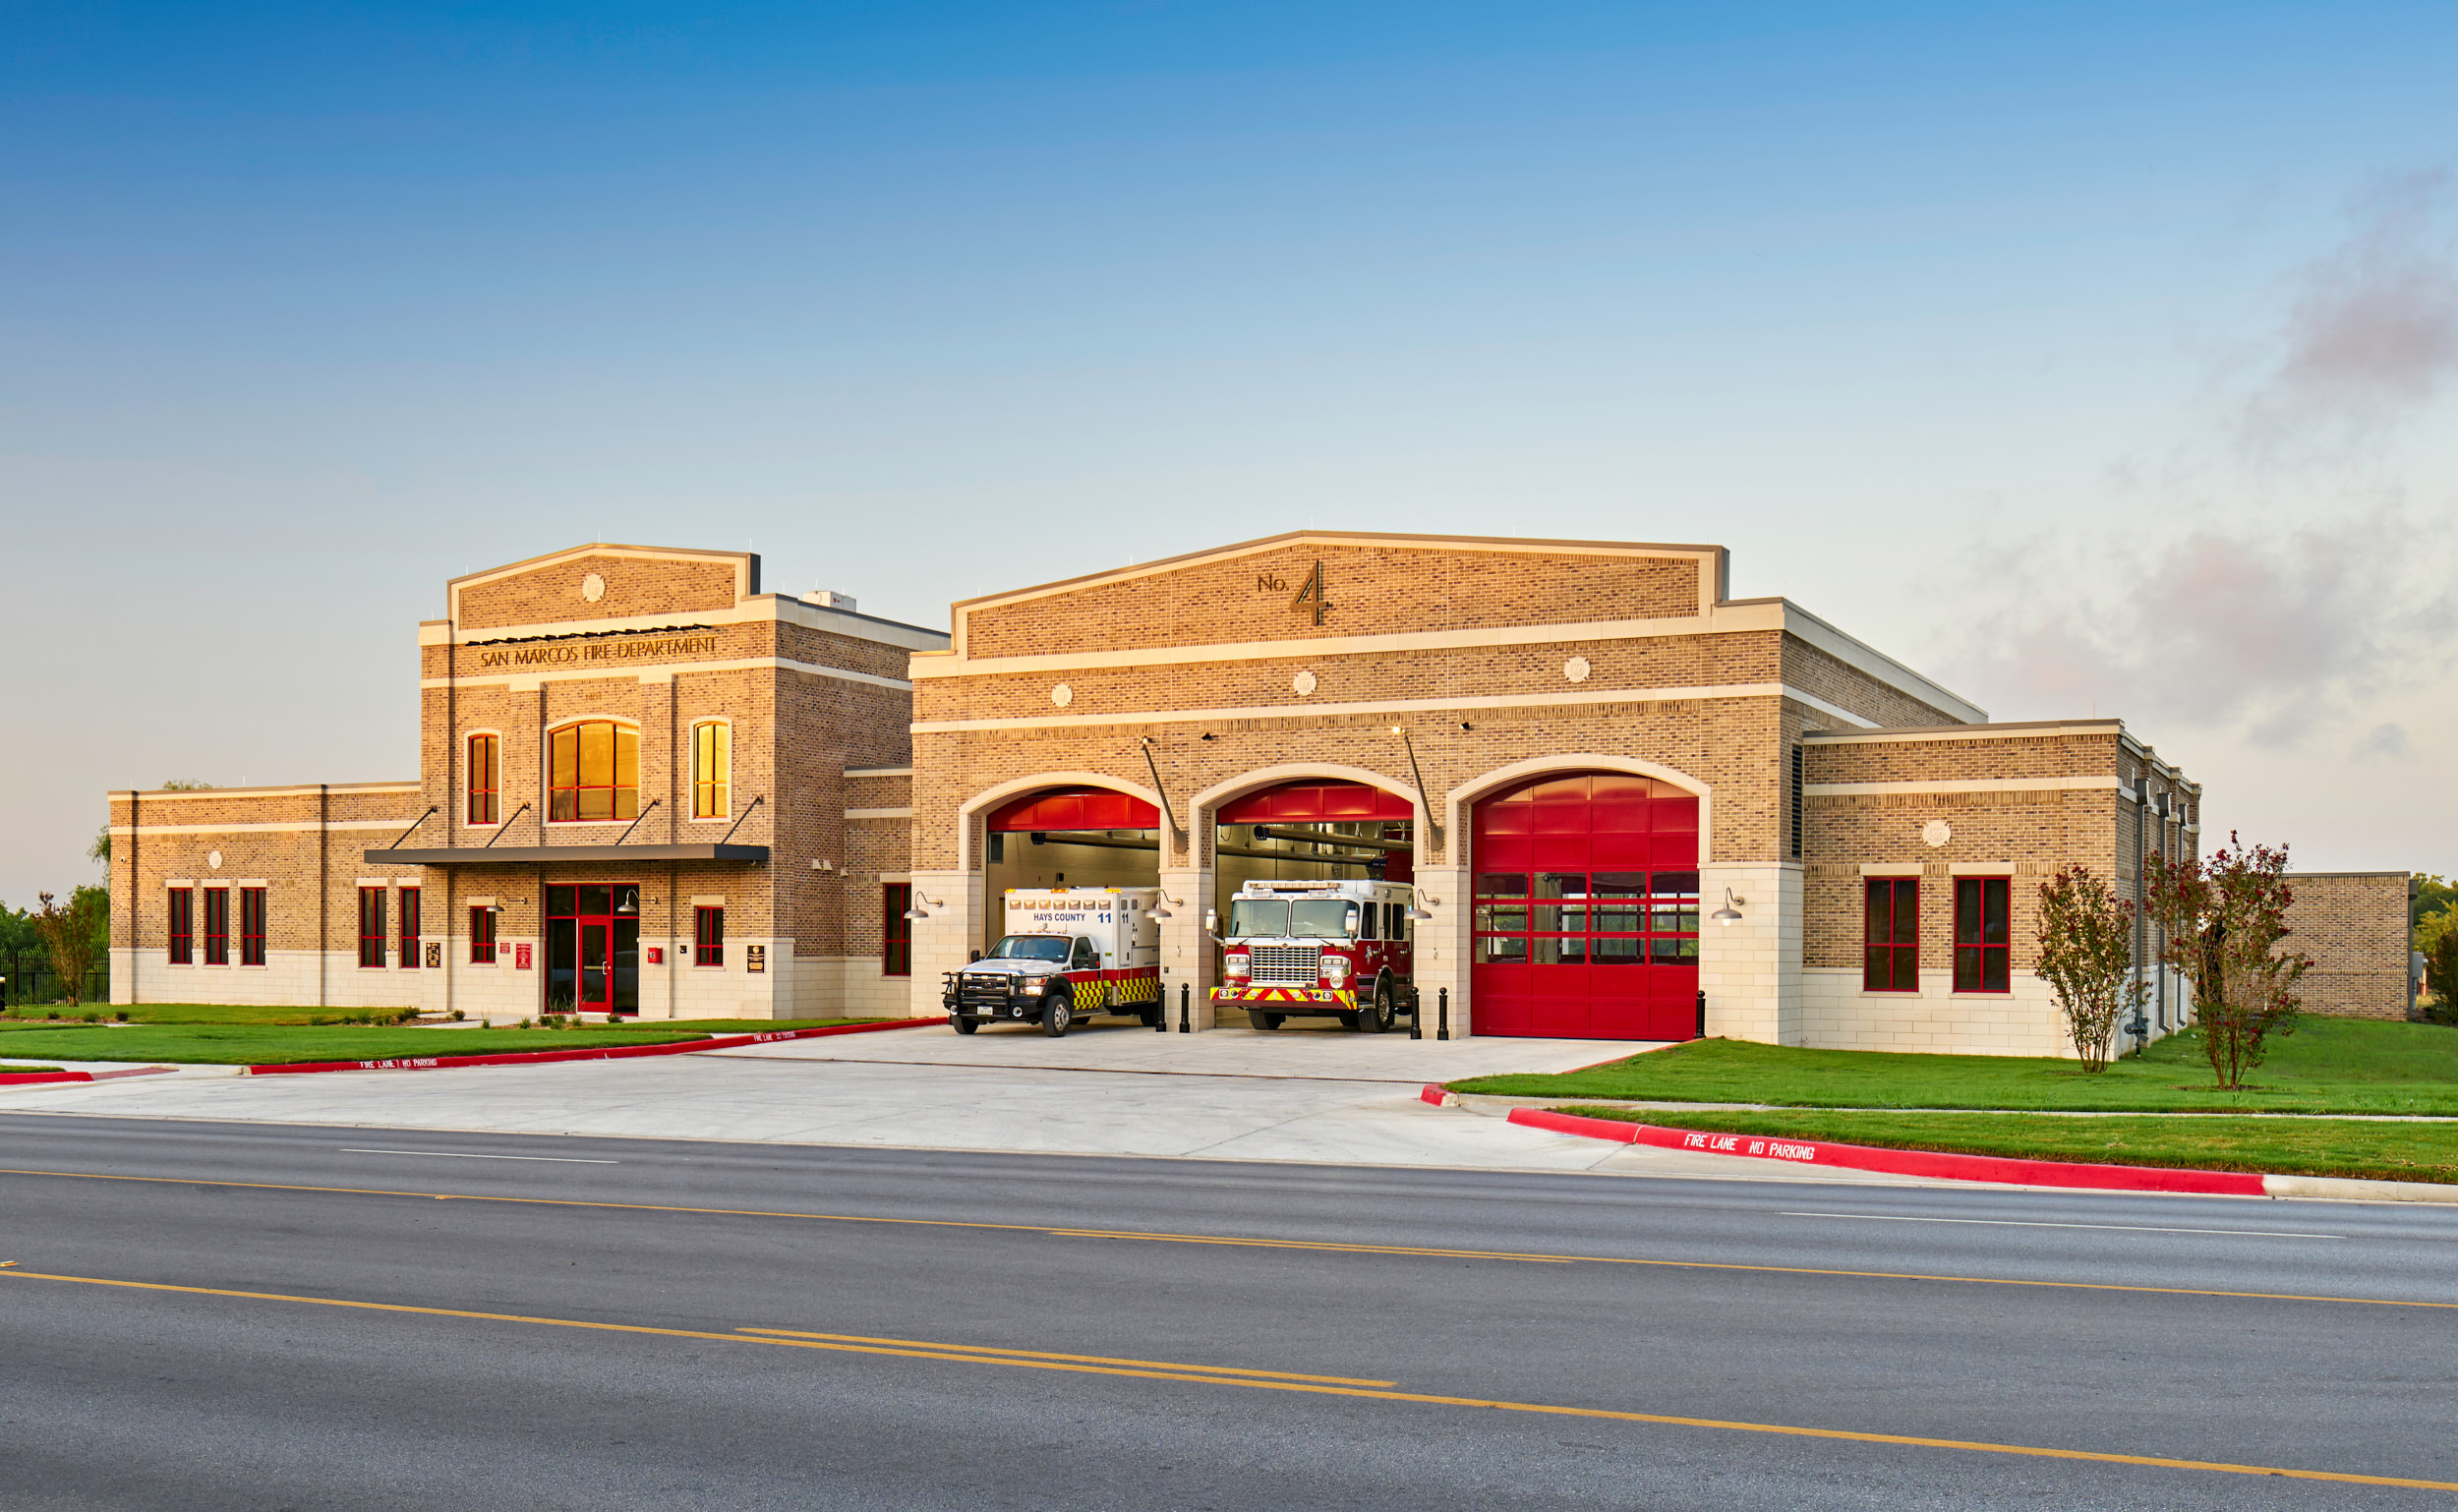 San Marcos Fire Station No. 4